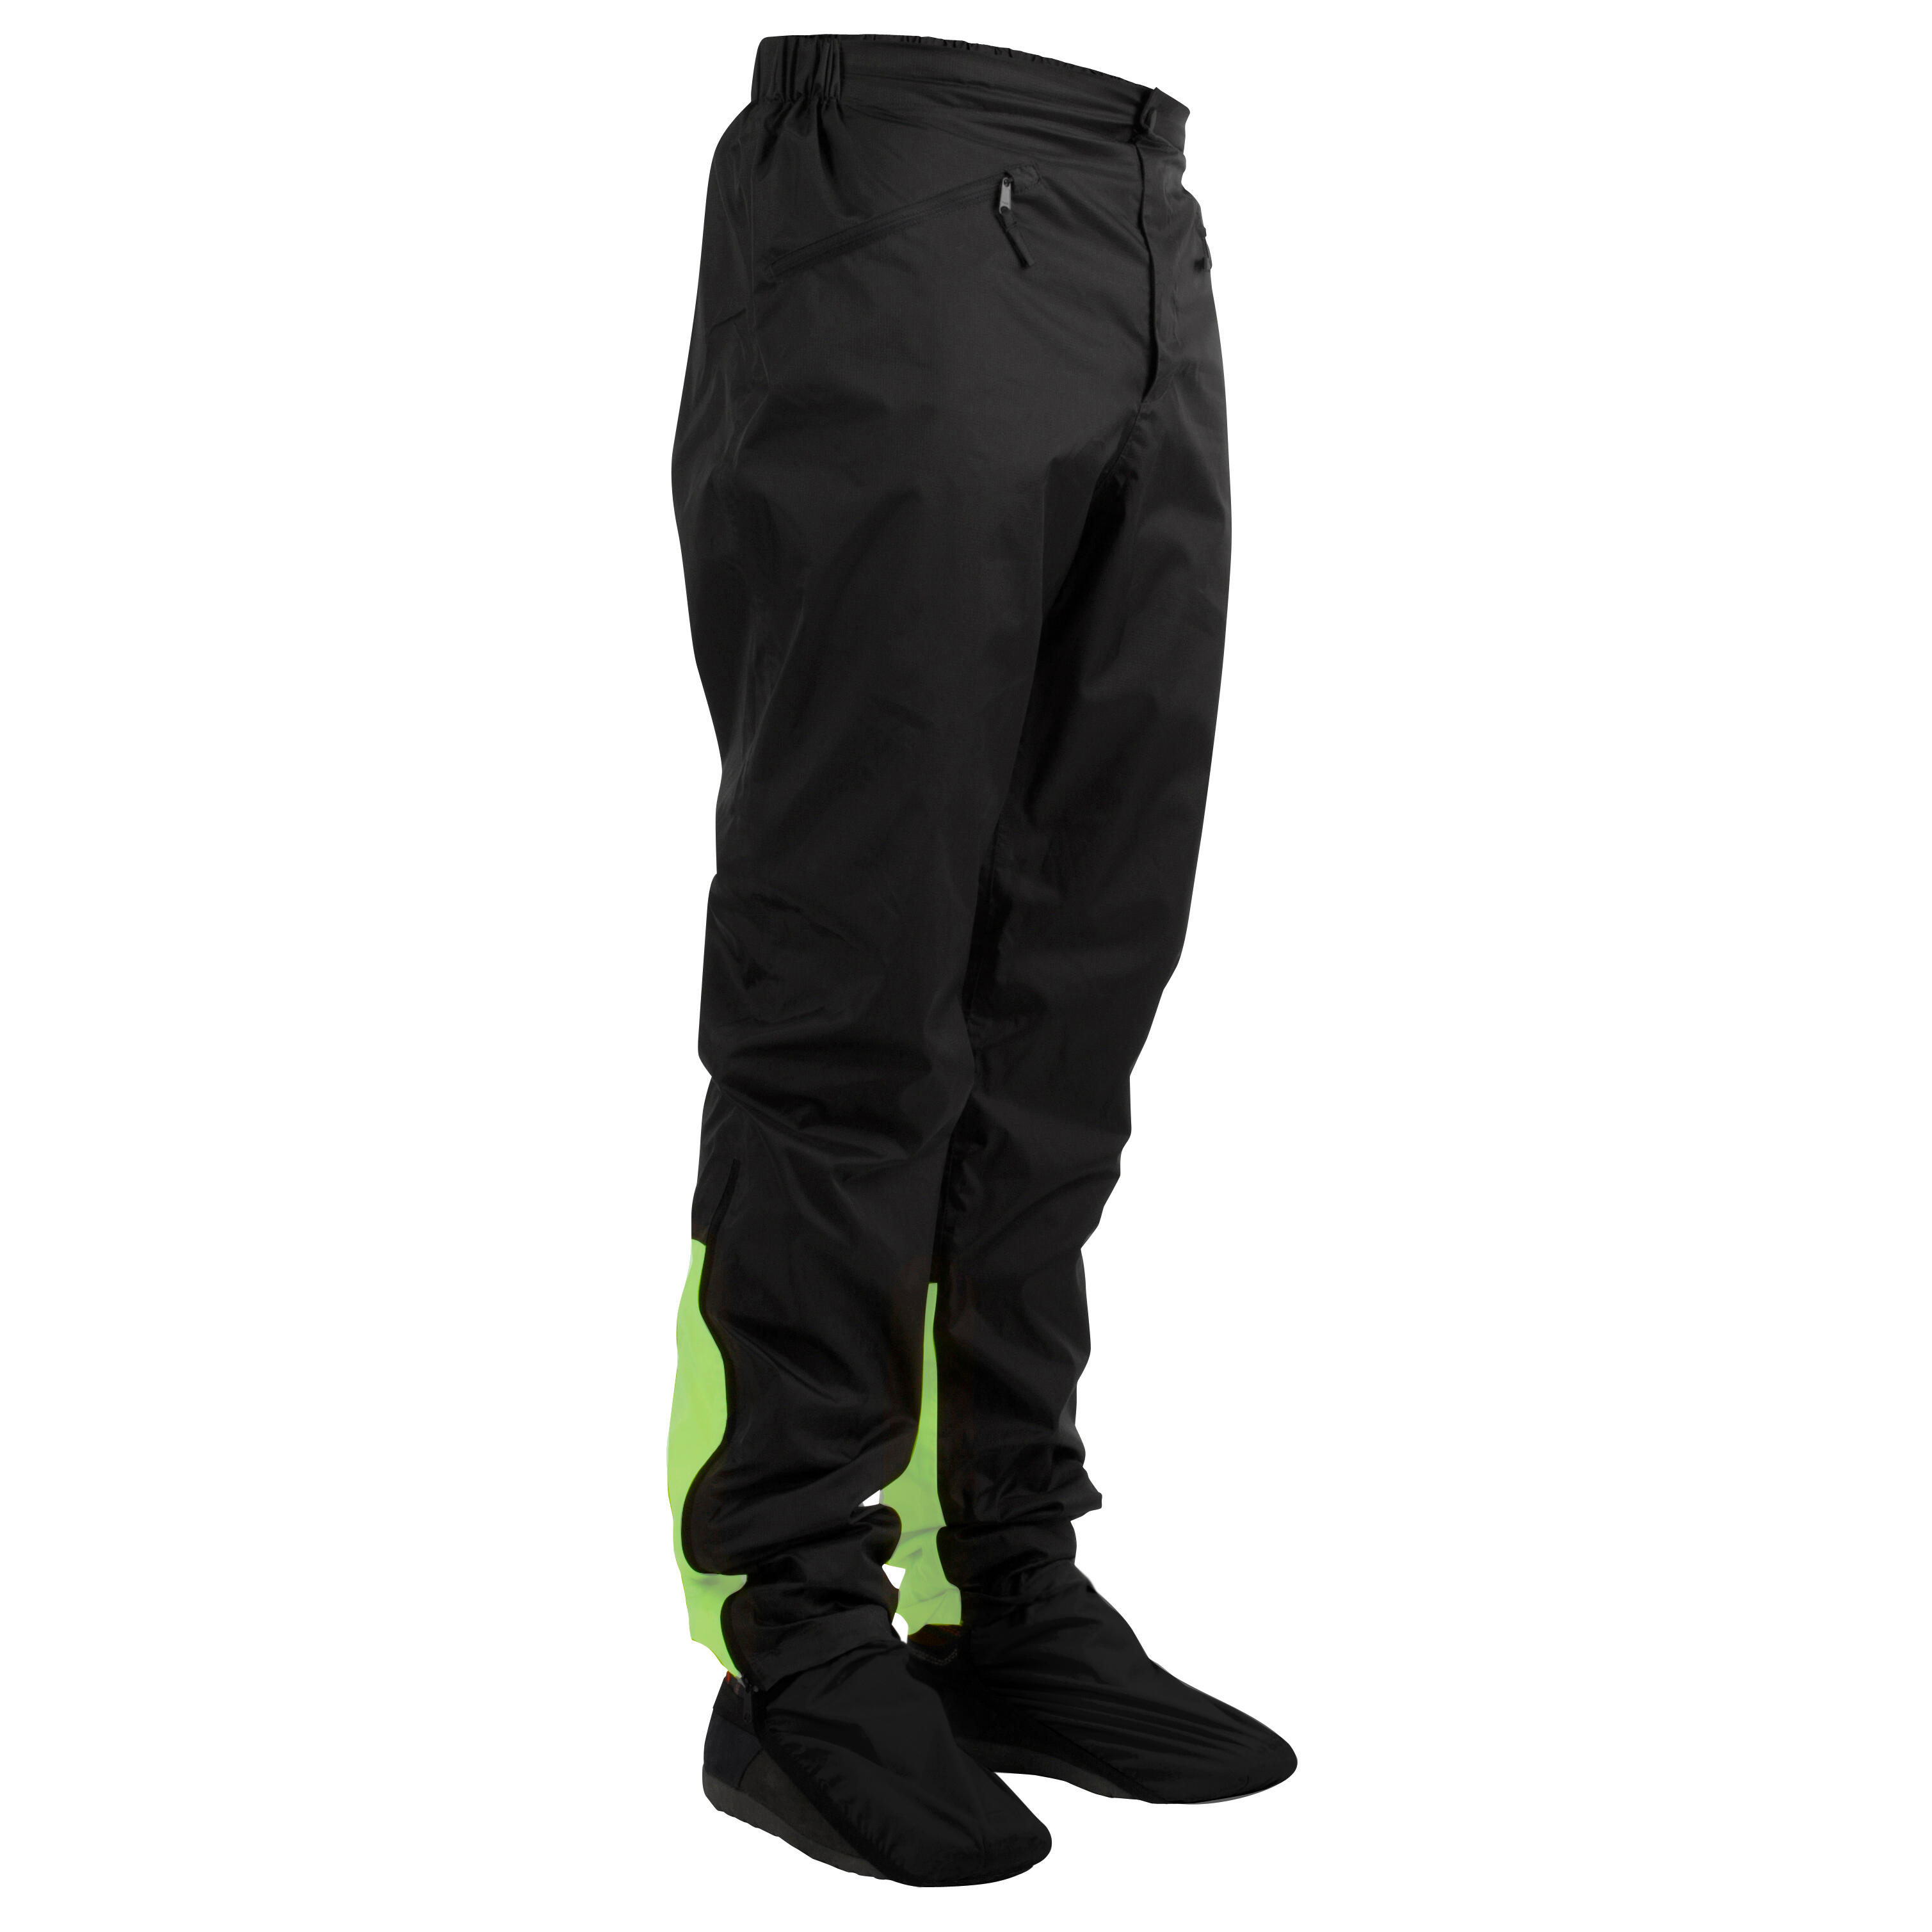 City Cycling Overtrousers Btwin 